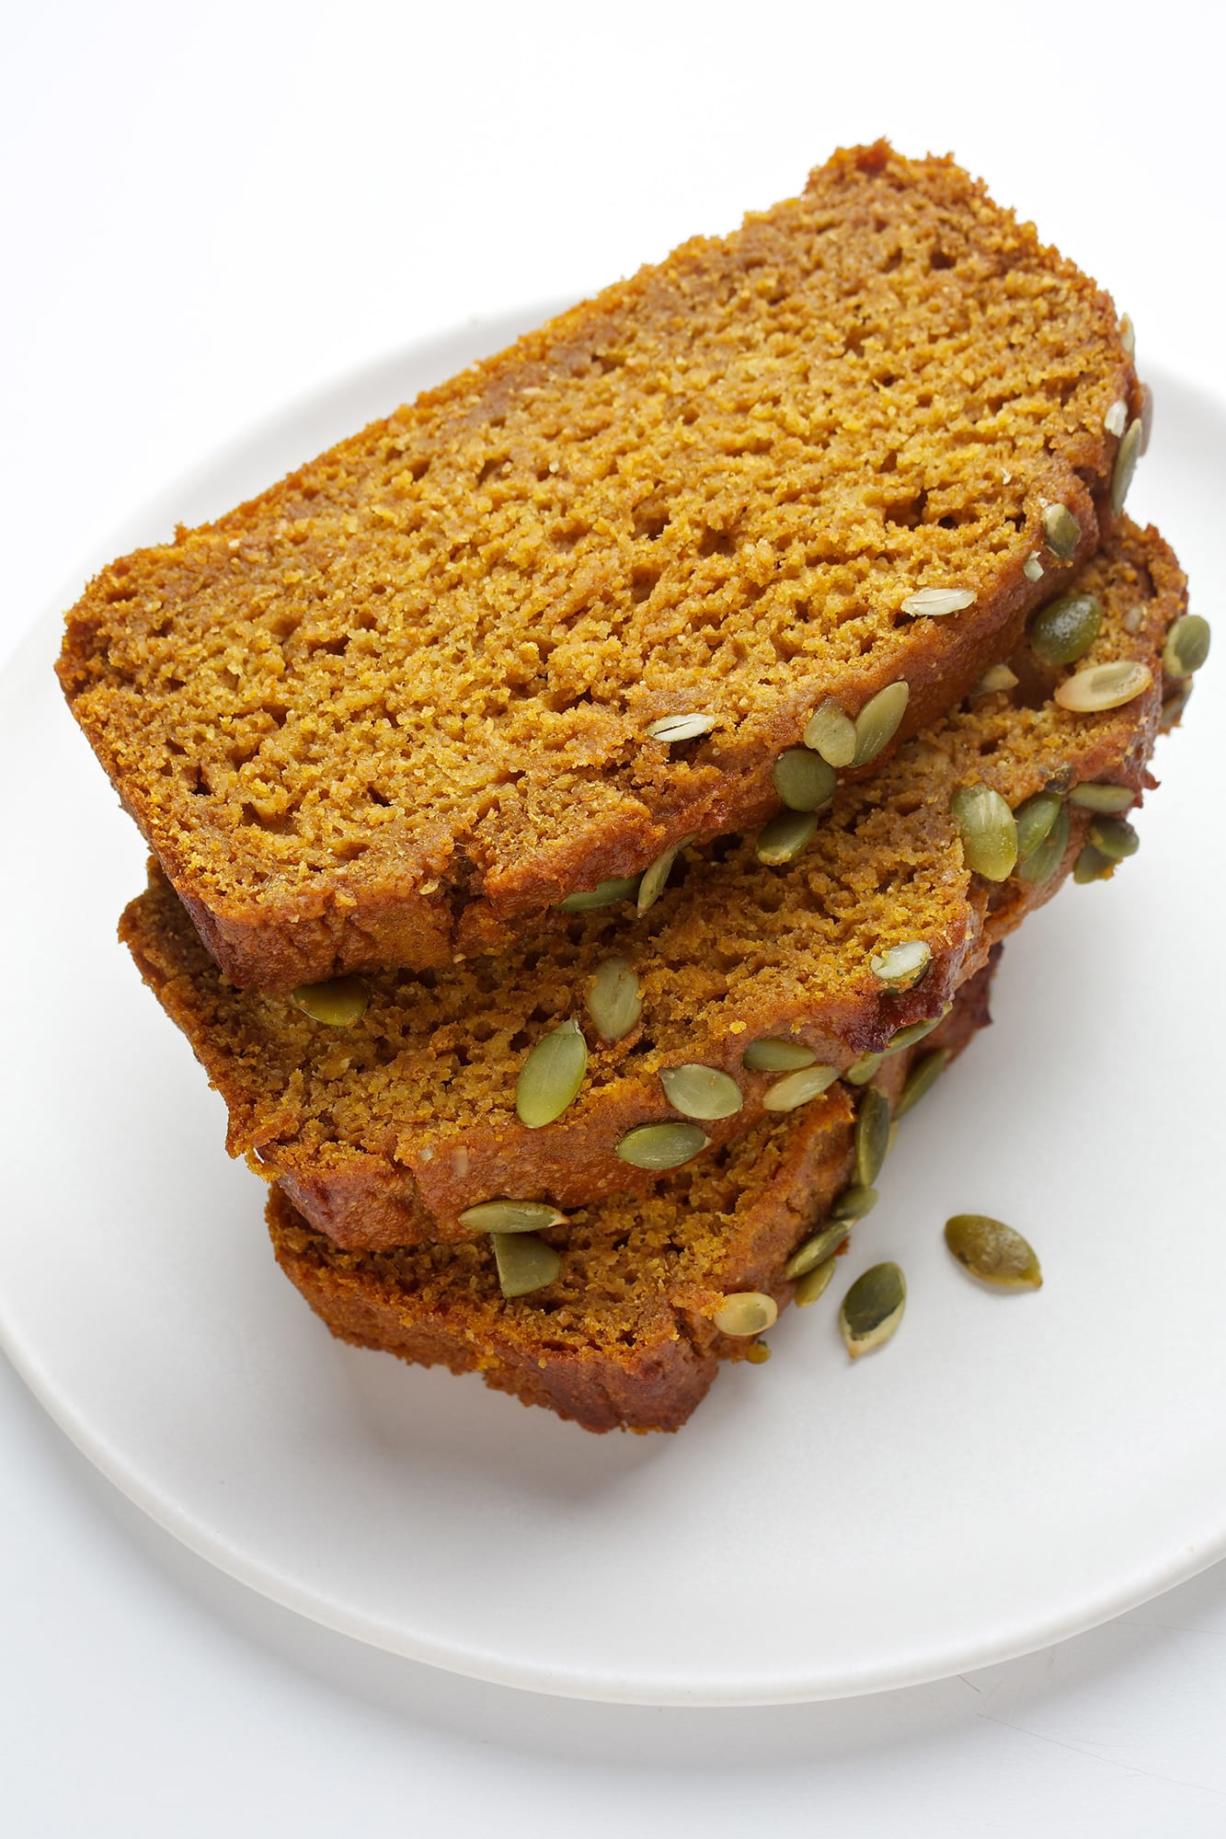 Olive Oil Pumpkin Bread is a delicious example of how you can substitute olive oil for butter when baking.